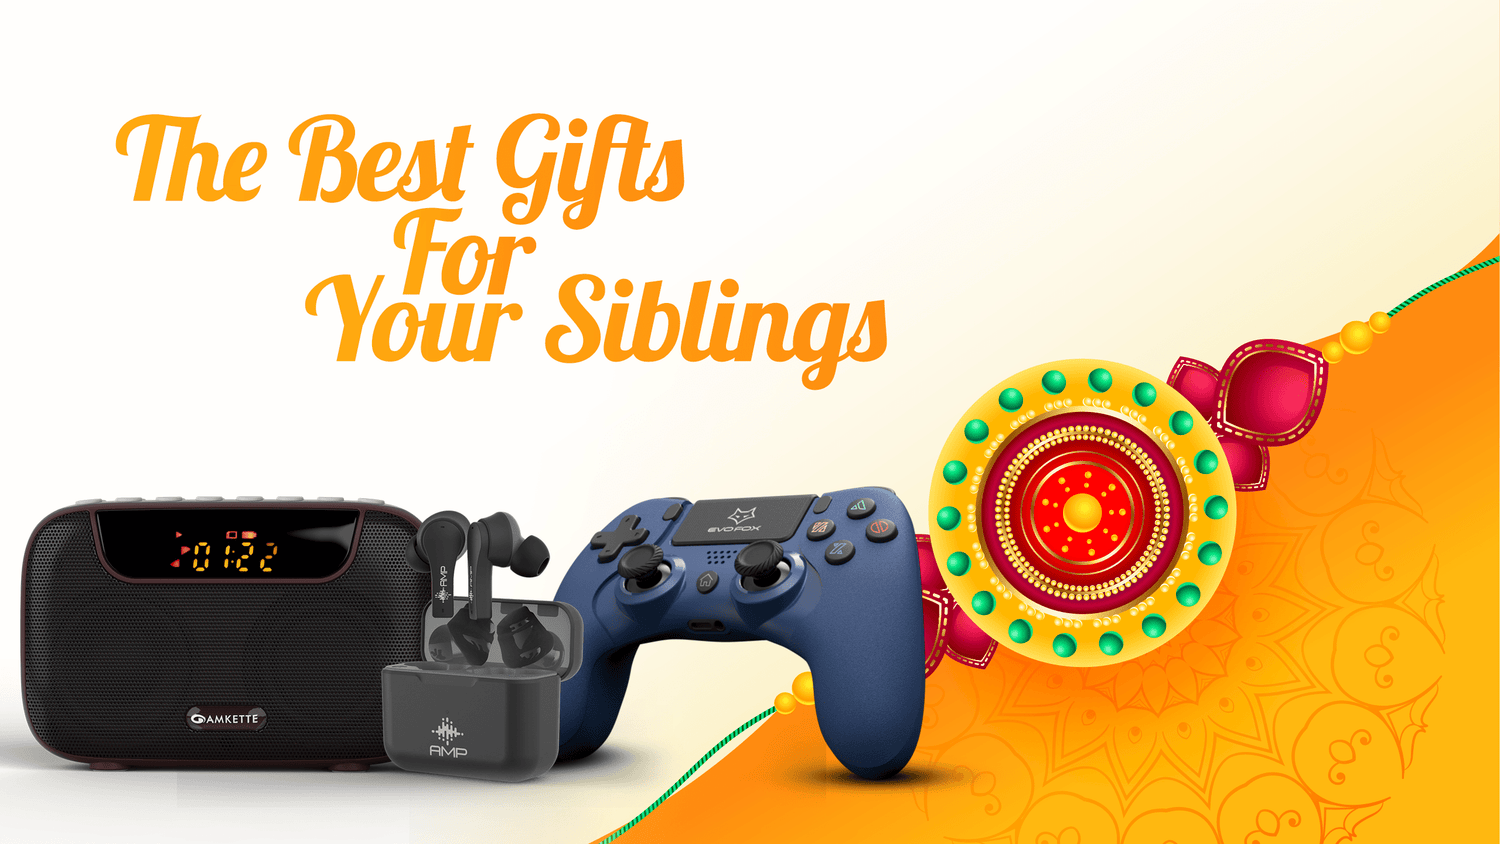 This Raksha Bandhan Give Your Siblings The Best Gift They Deserve